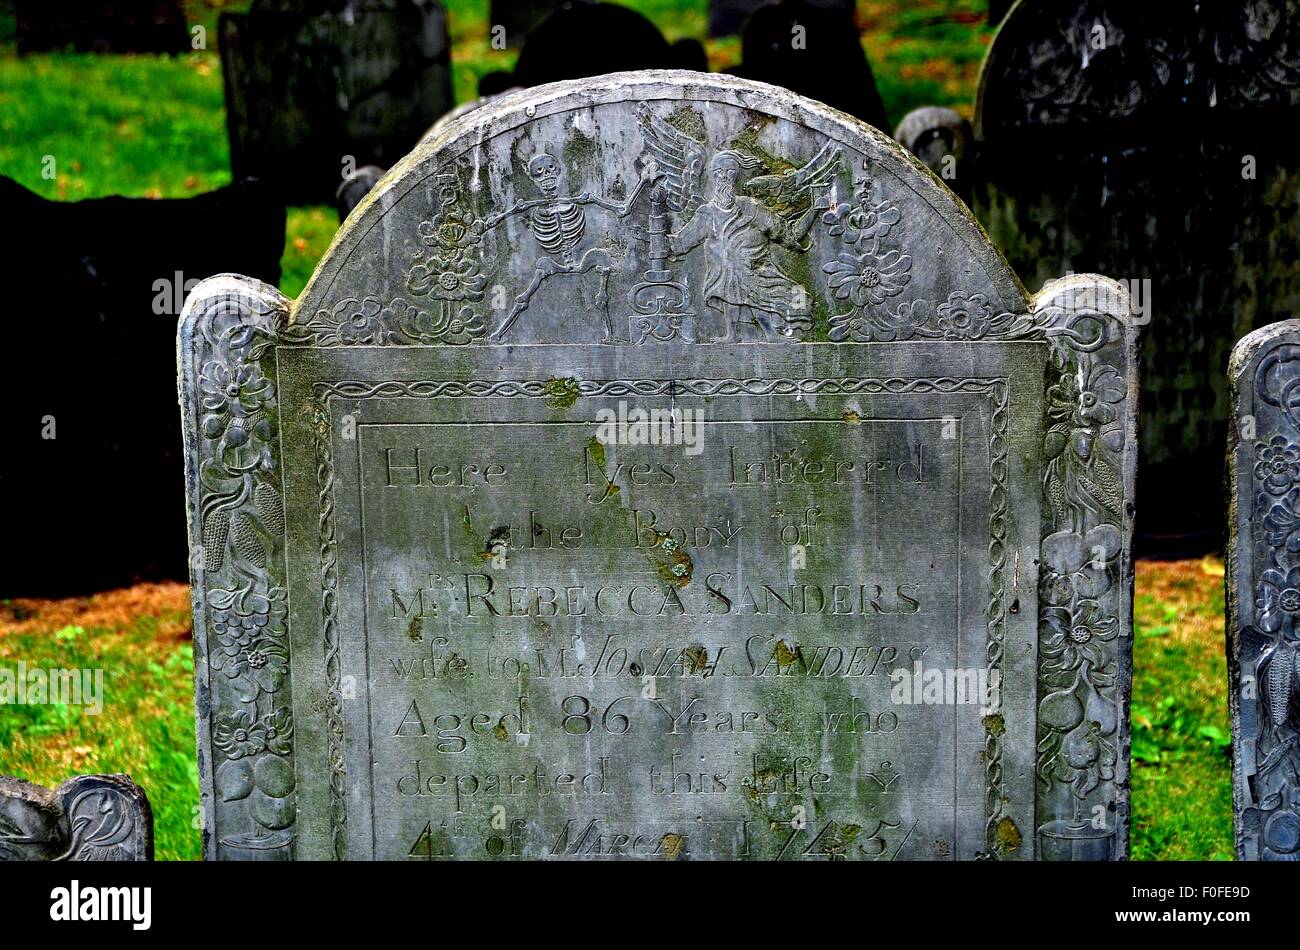 Boston, MA: 18th century gravestone with bas relief depicting the dance of death at King's Chapel burial ground Stock Photo